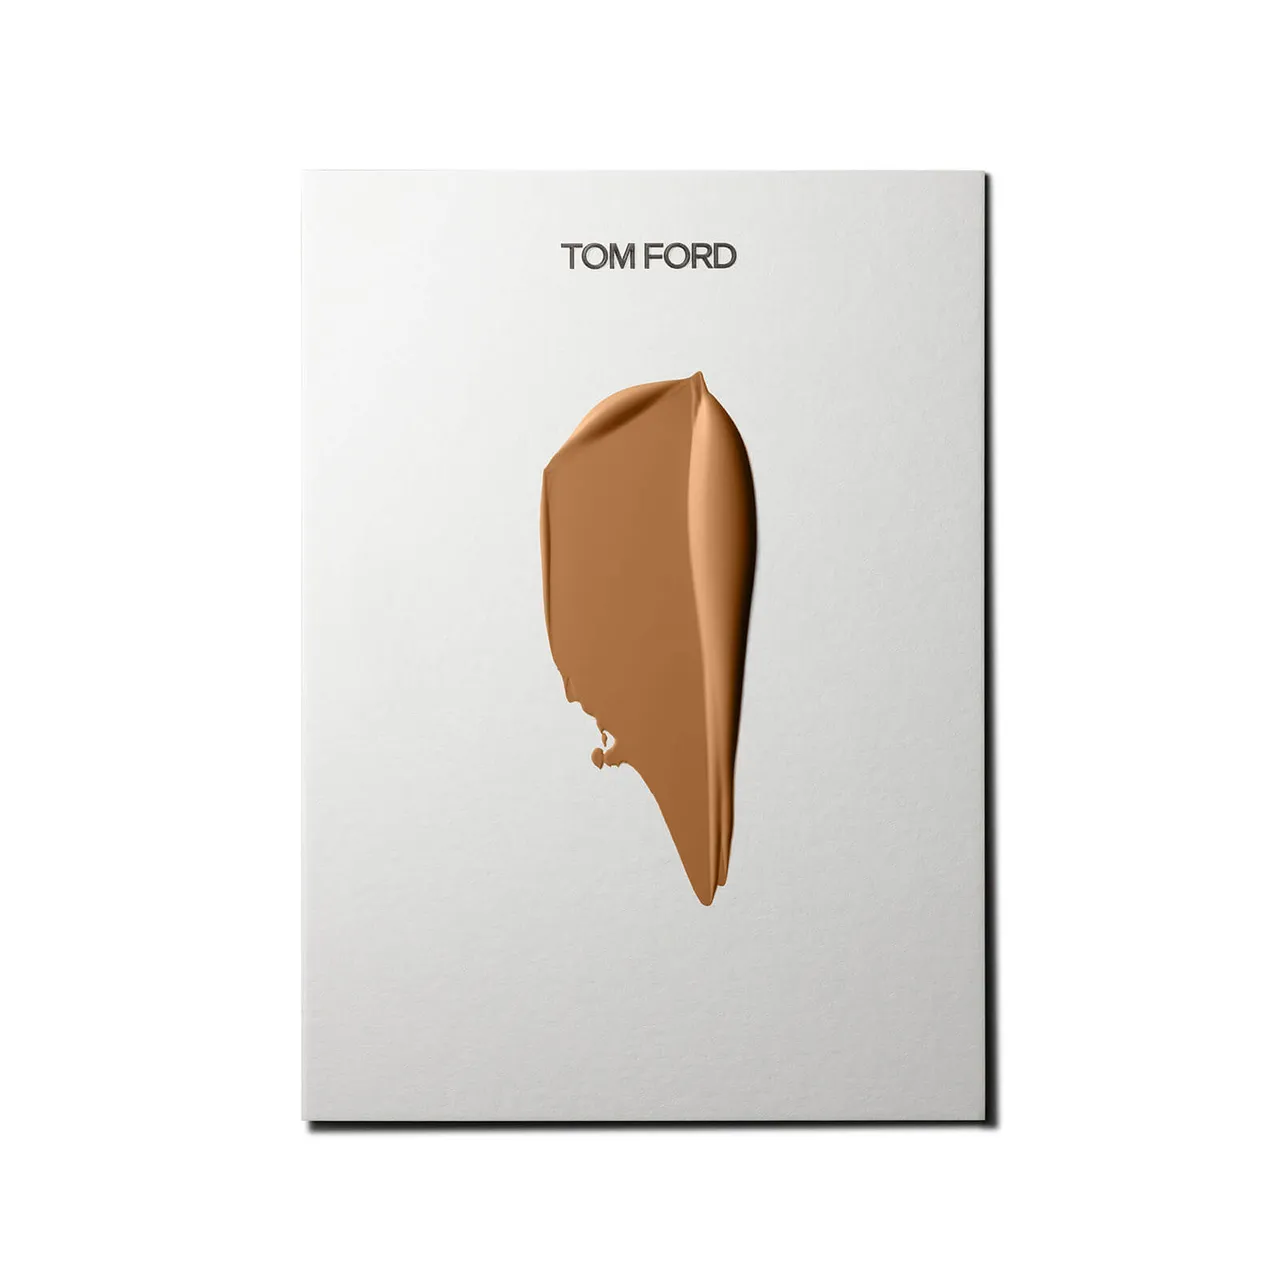 Tom Ford Traceless Soft Matte Foundation 30ml (Various Shades) - Golden Almond